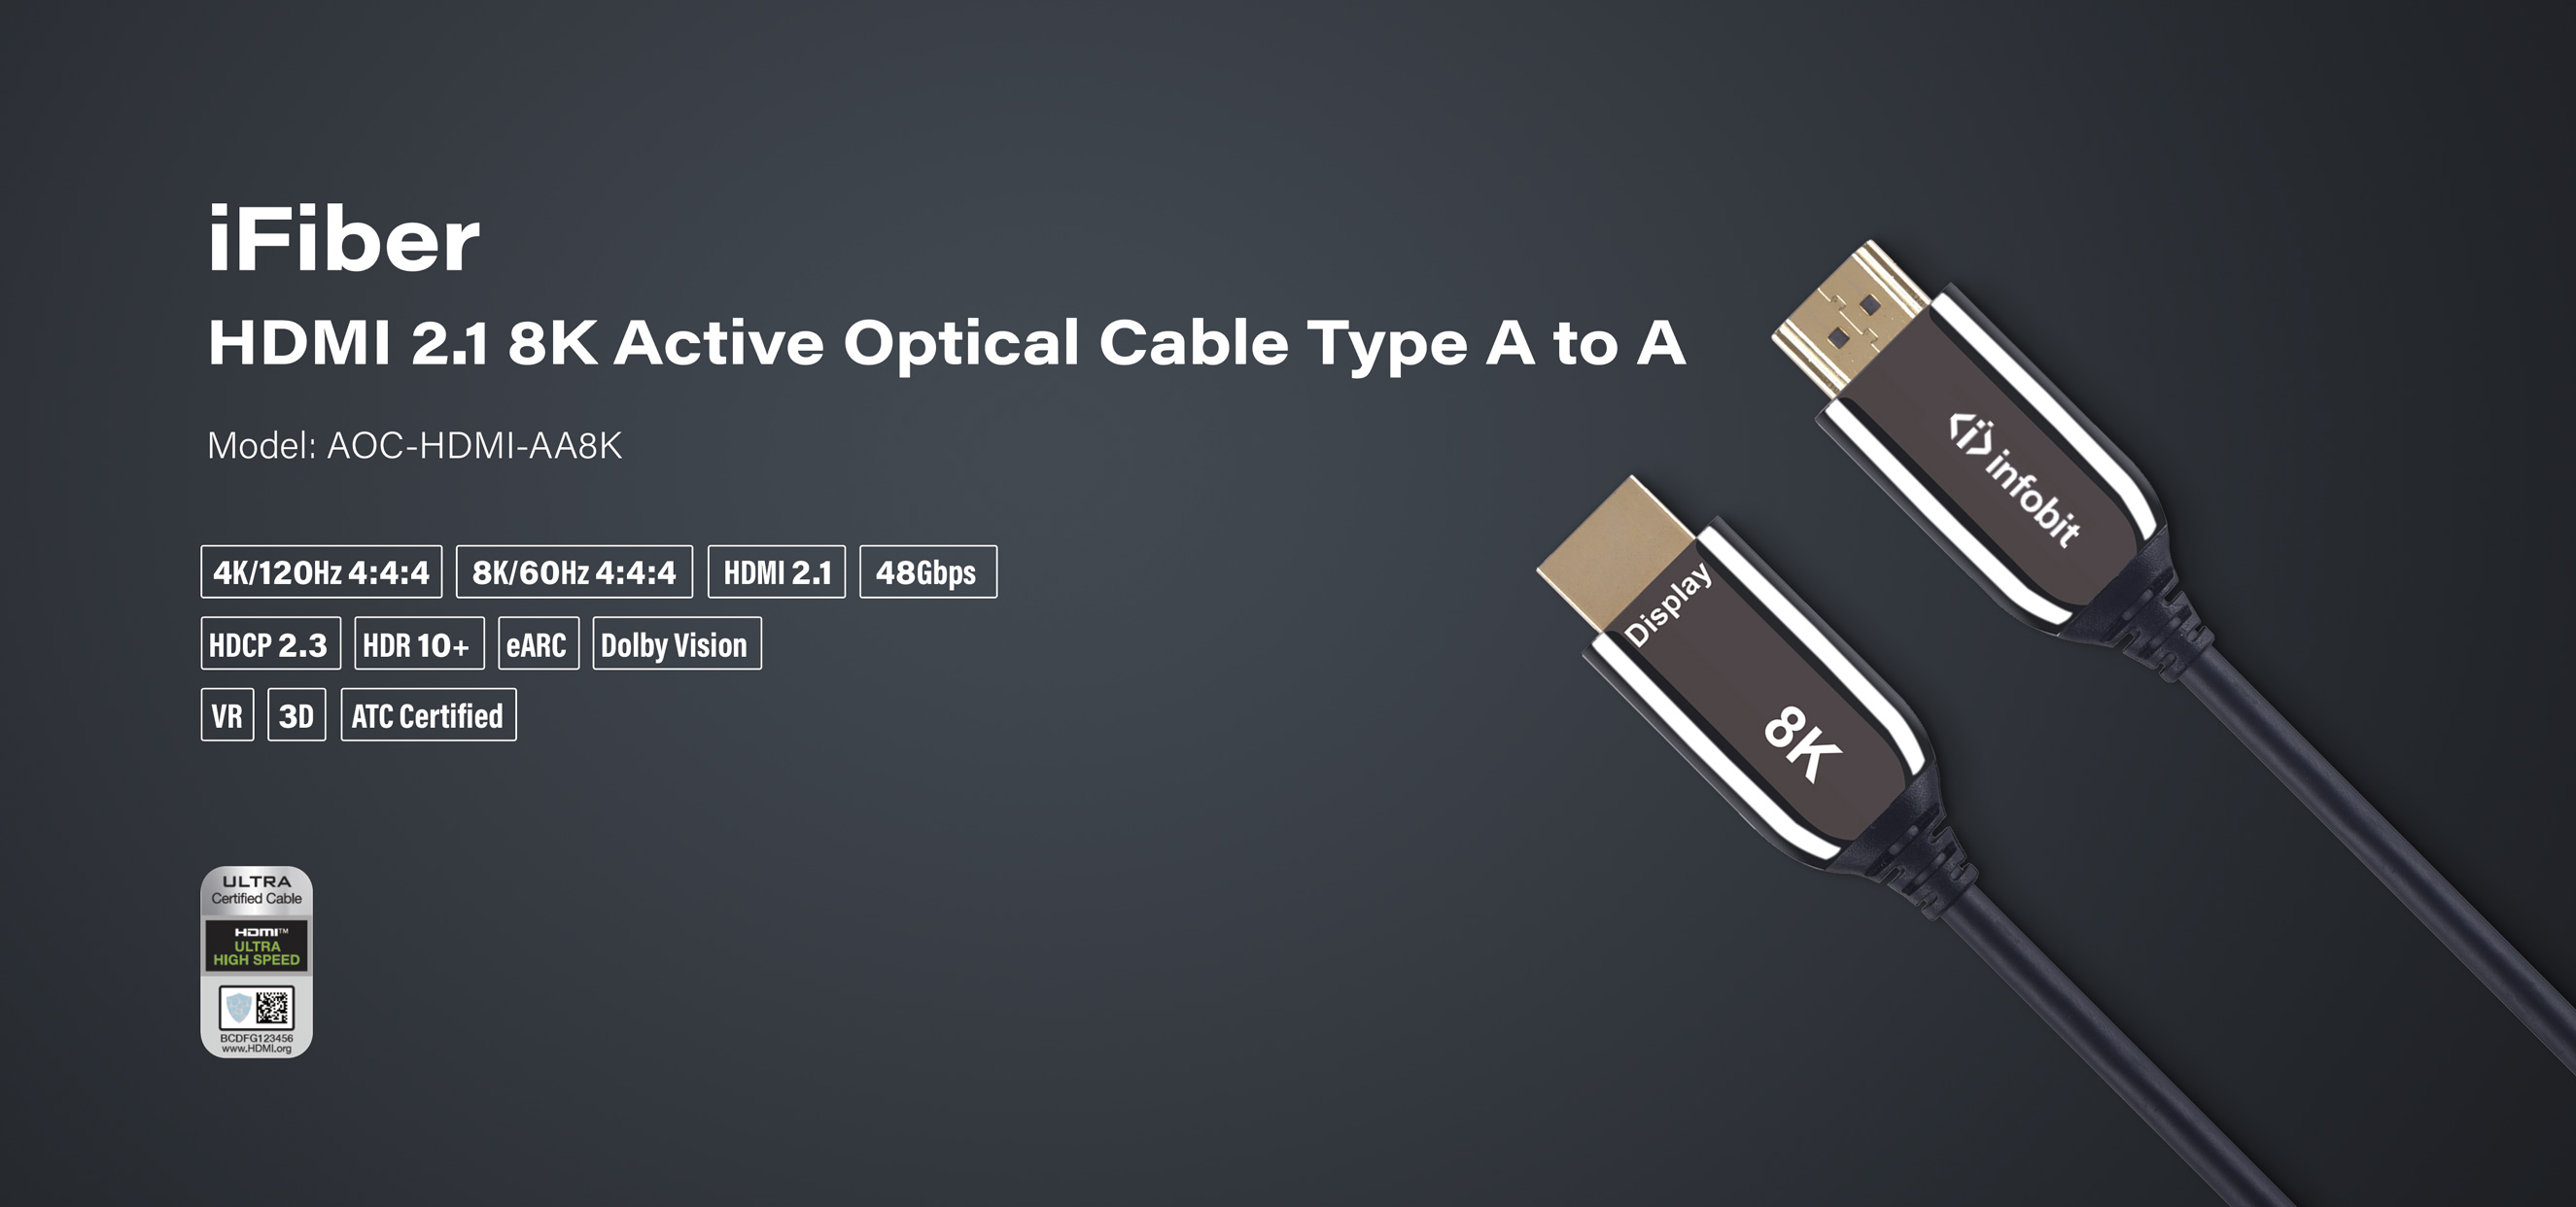 iFiber HDMI 2.1 8K Active Optical Cable 48Gbps